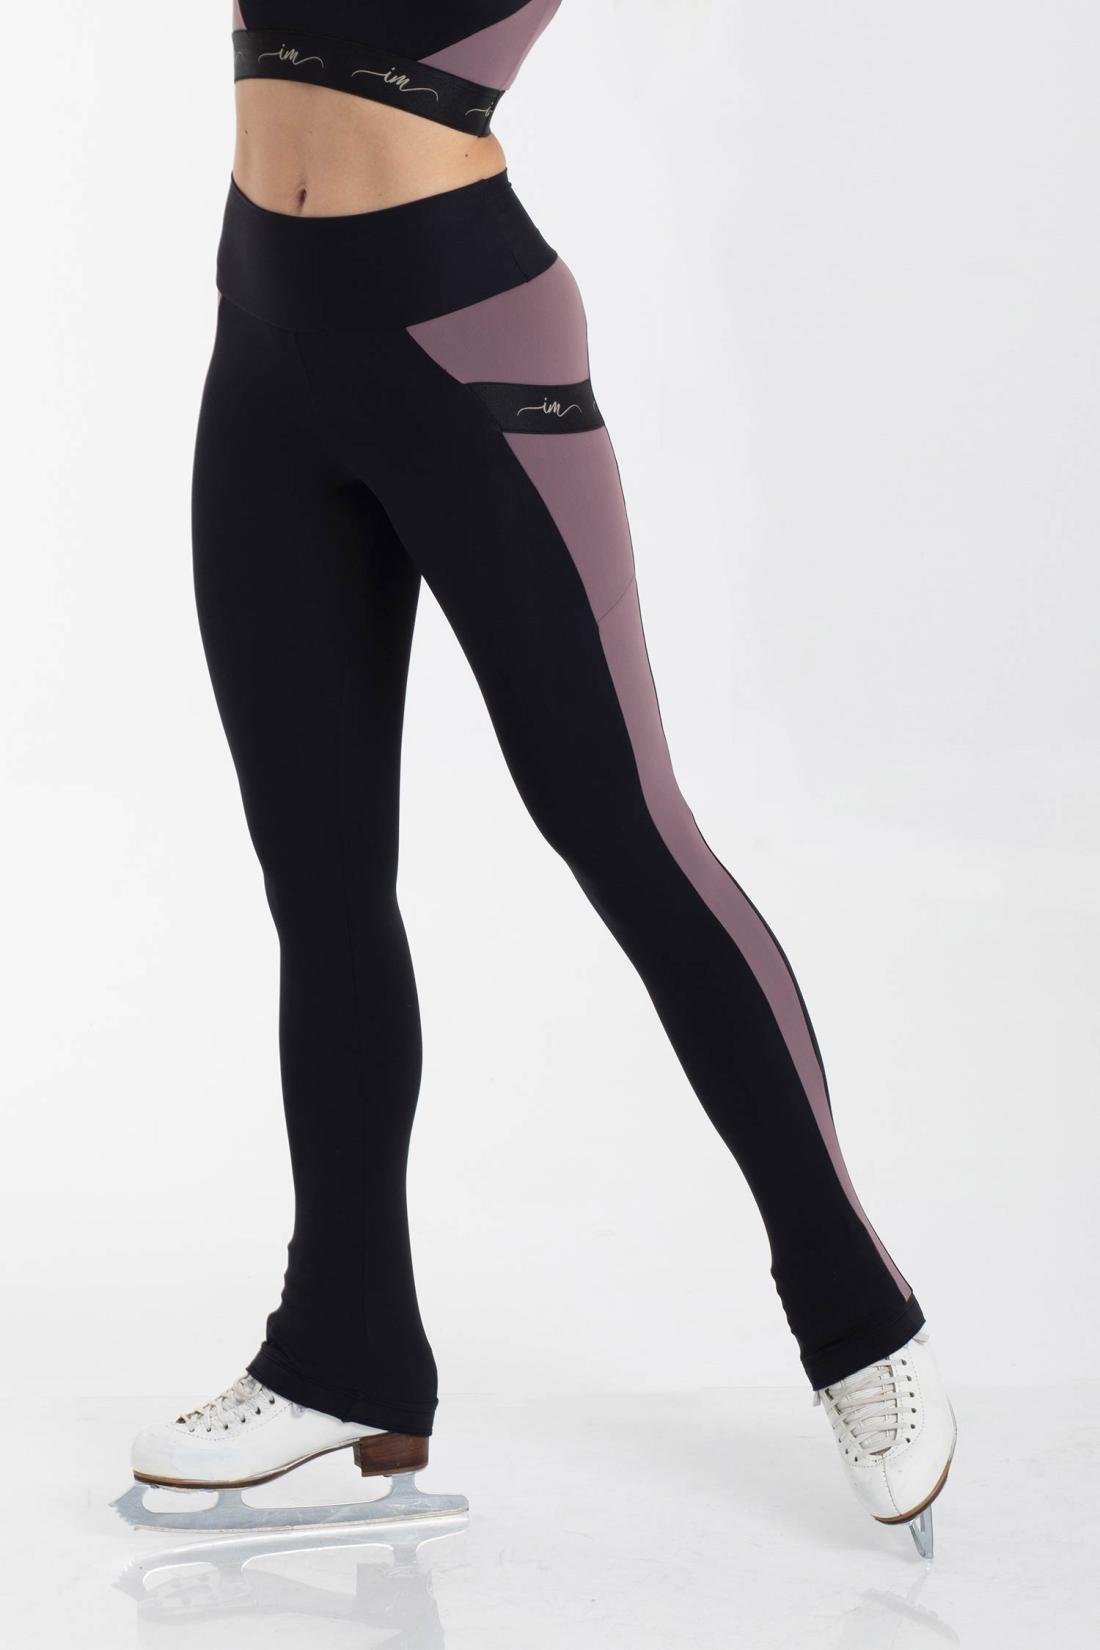 Bicolor Bea Heel cover Leggings with brushed fabric for Artistic Skating by Intermezzo